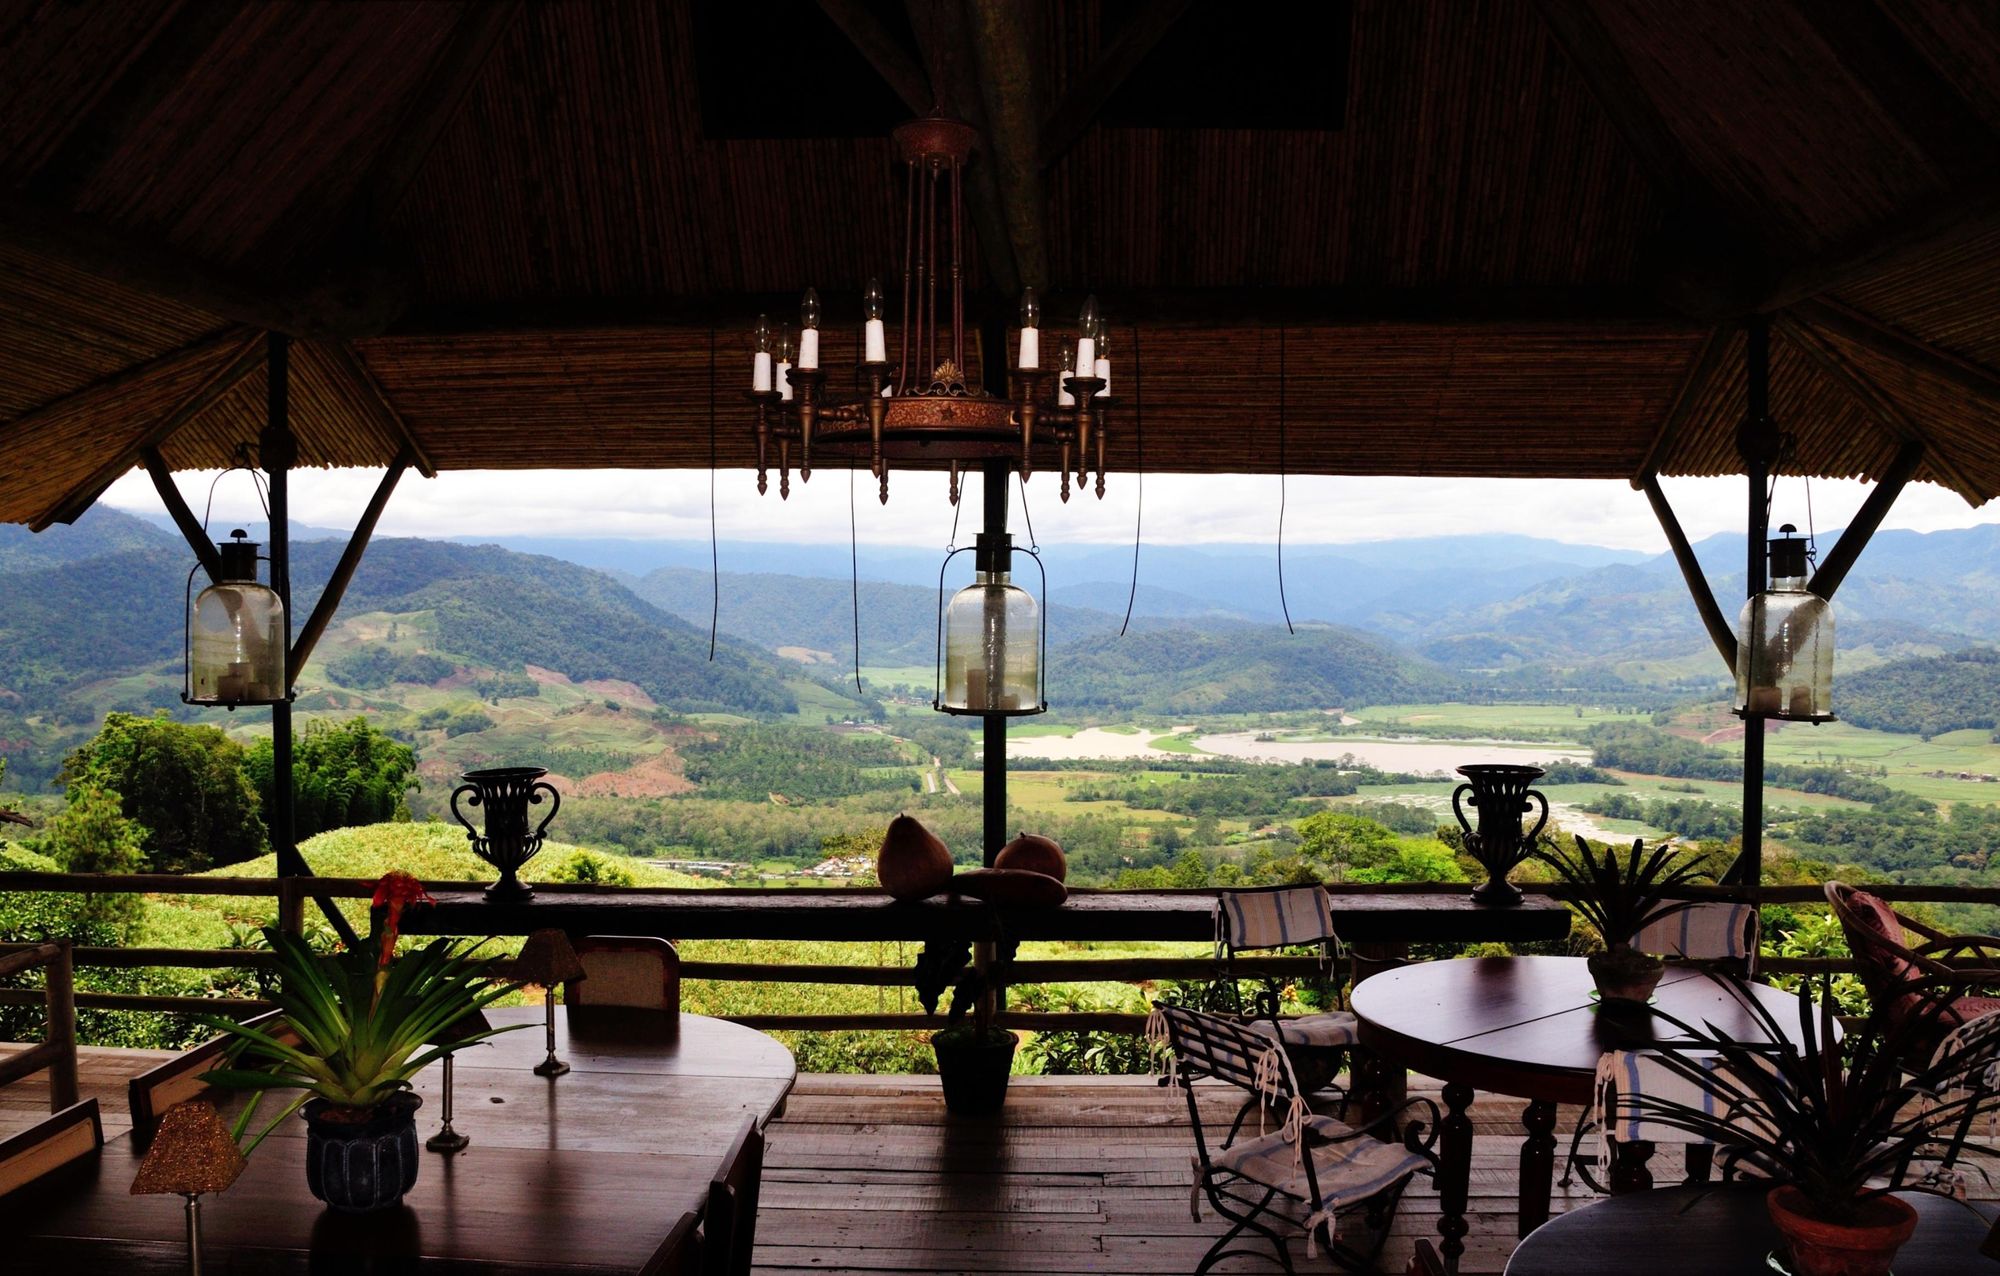 A mountain top bungalow overlooking Turrialba, Costa Rica. Photo: Getty